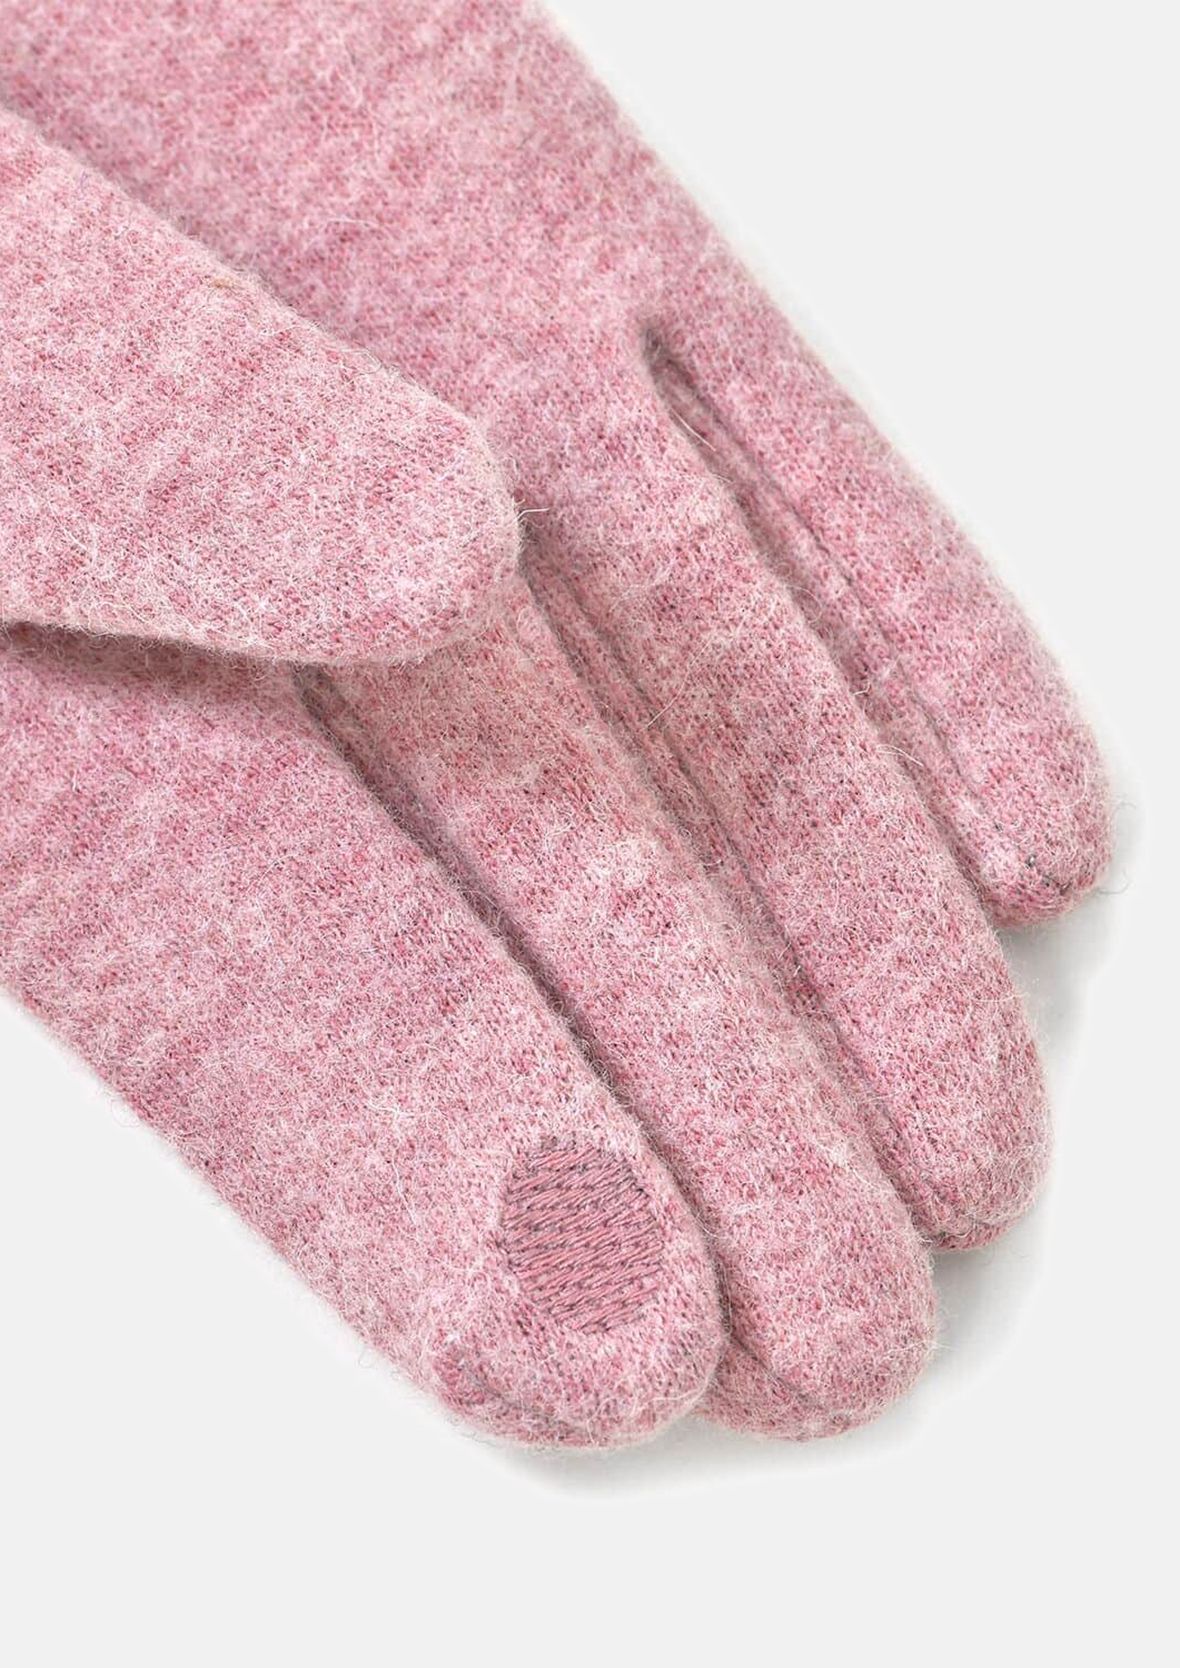 Cashmere Gloves with Button Detail - Touch Screen Compatible